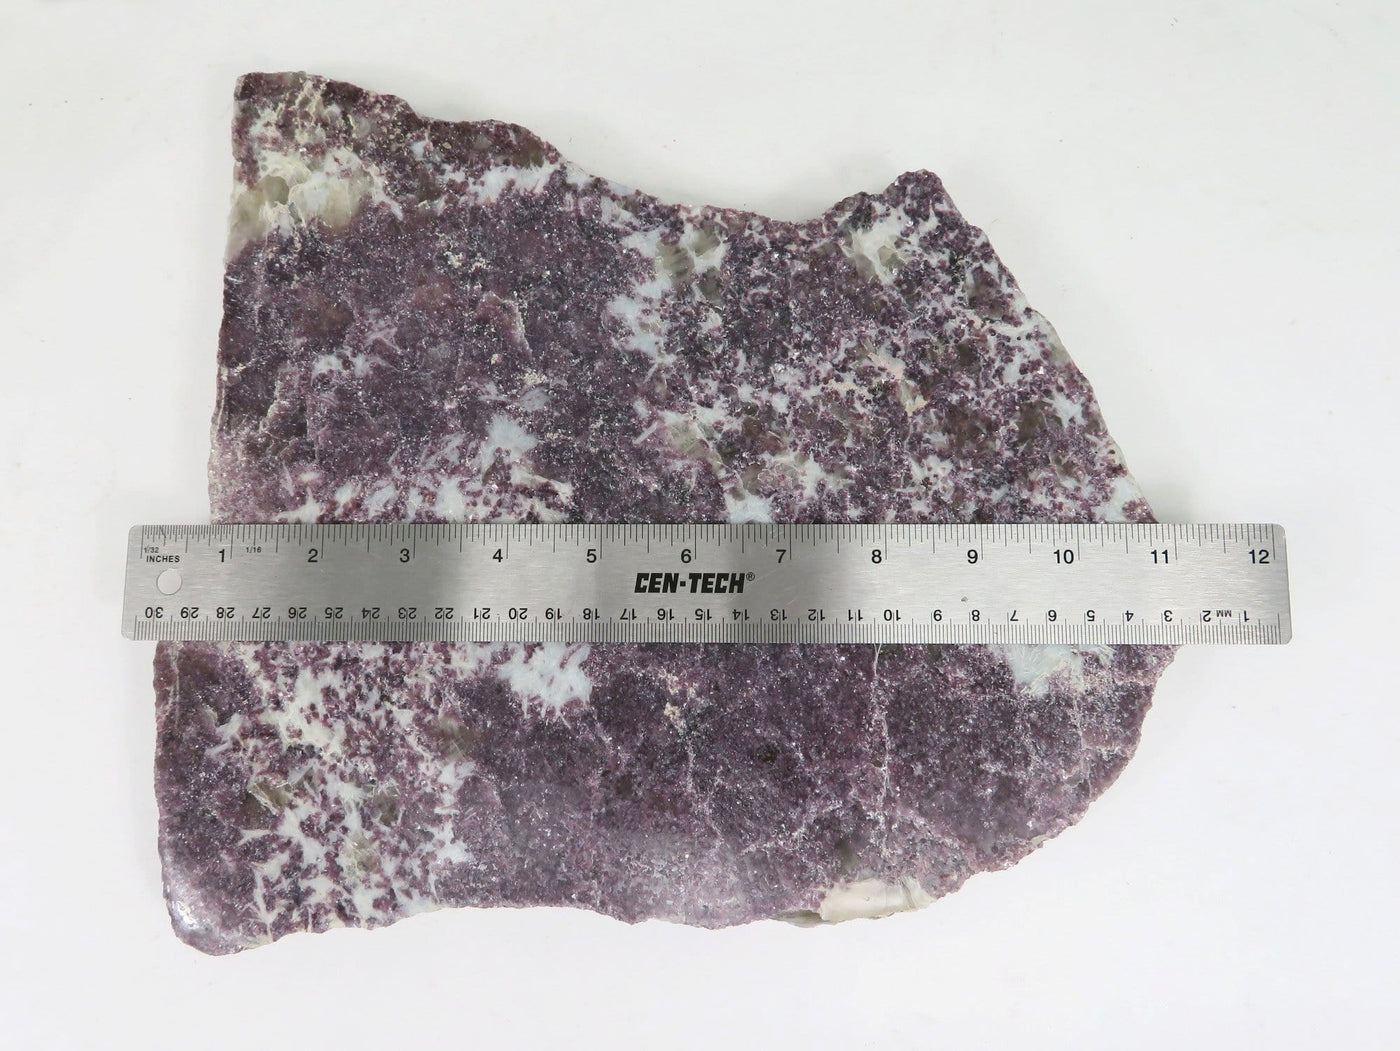 Lepidolite Platter with ruler on it for size reference